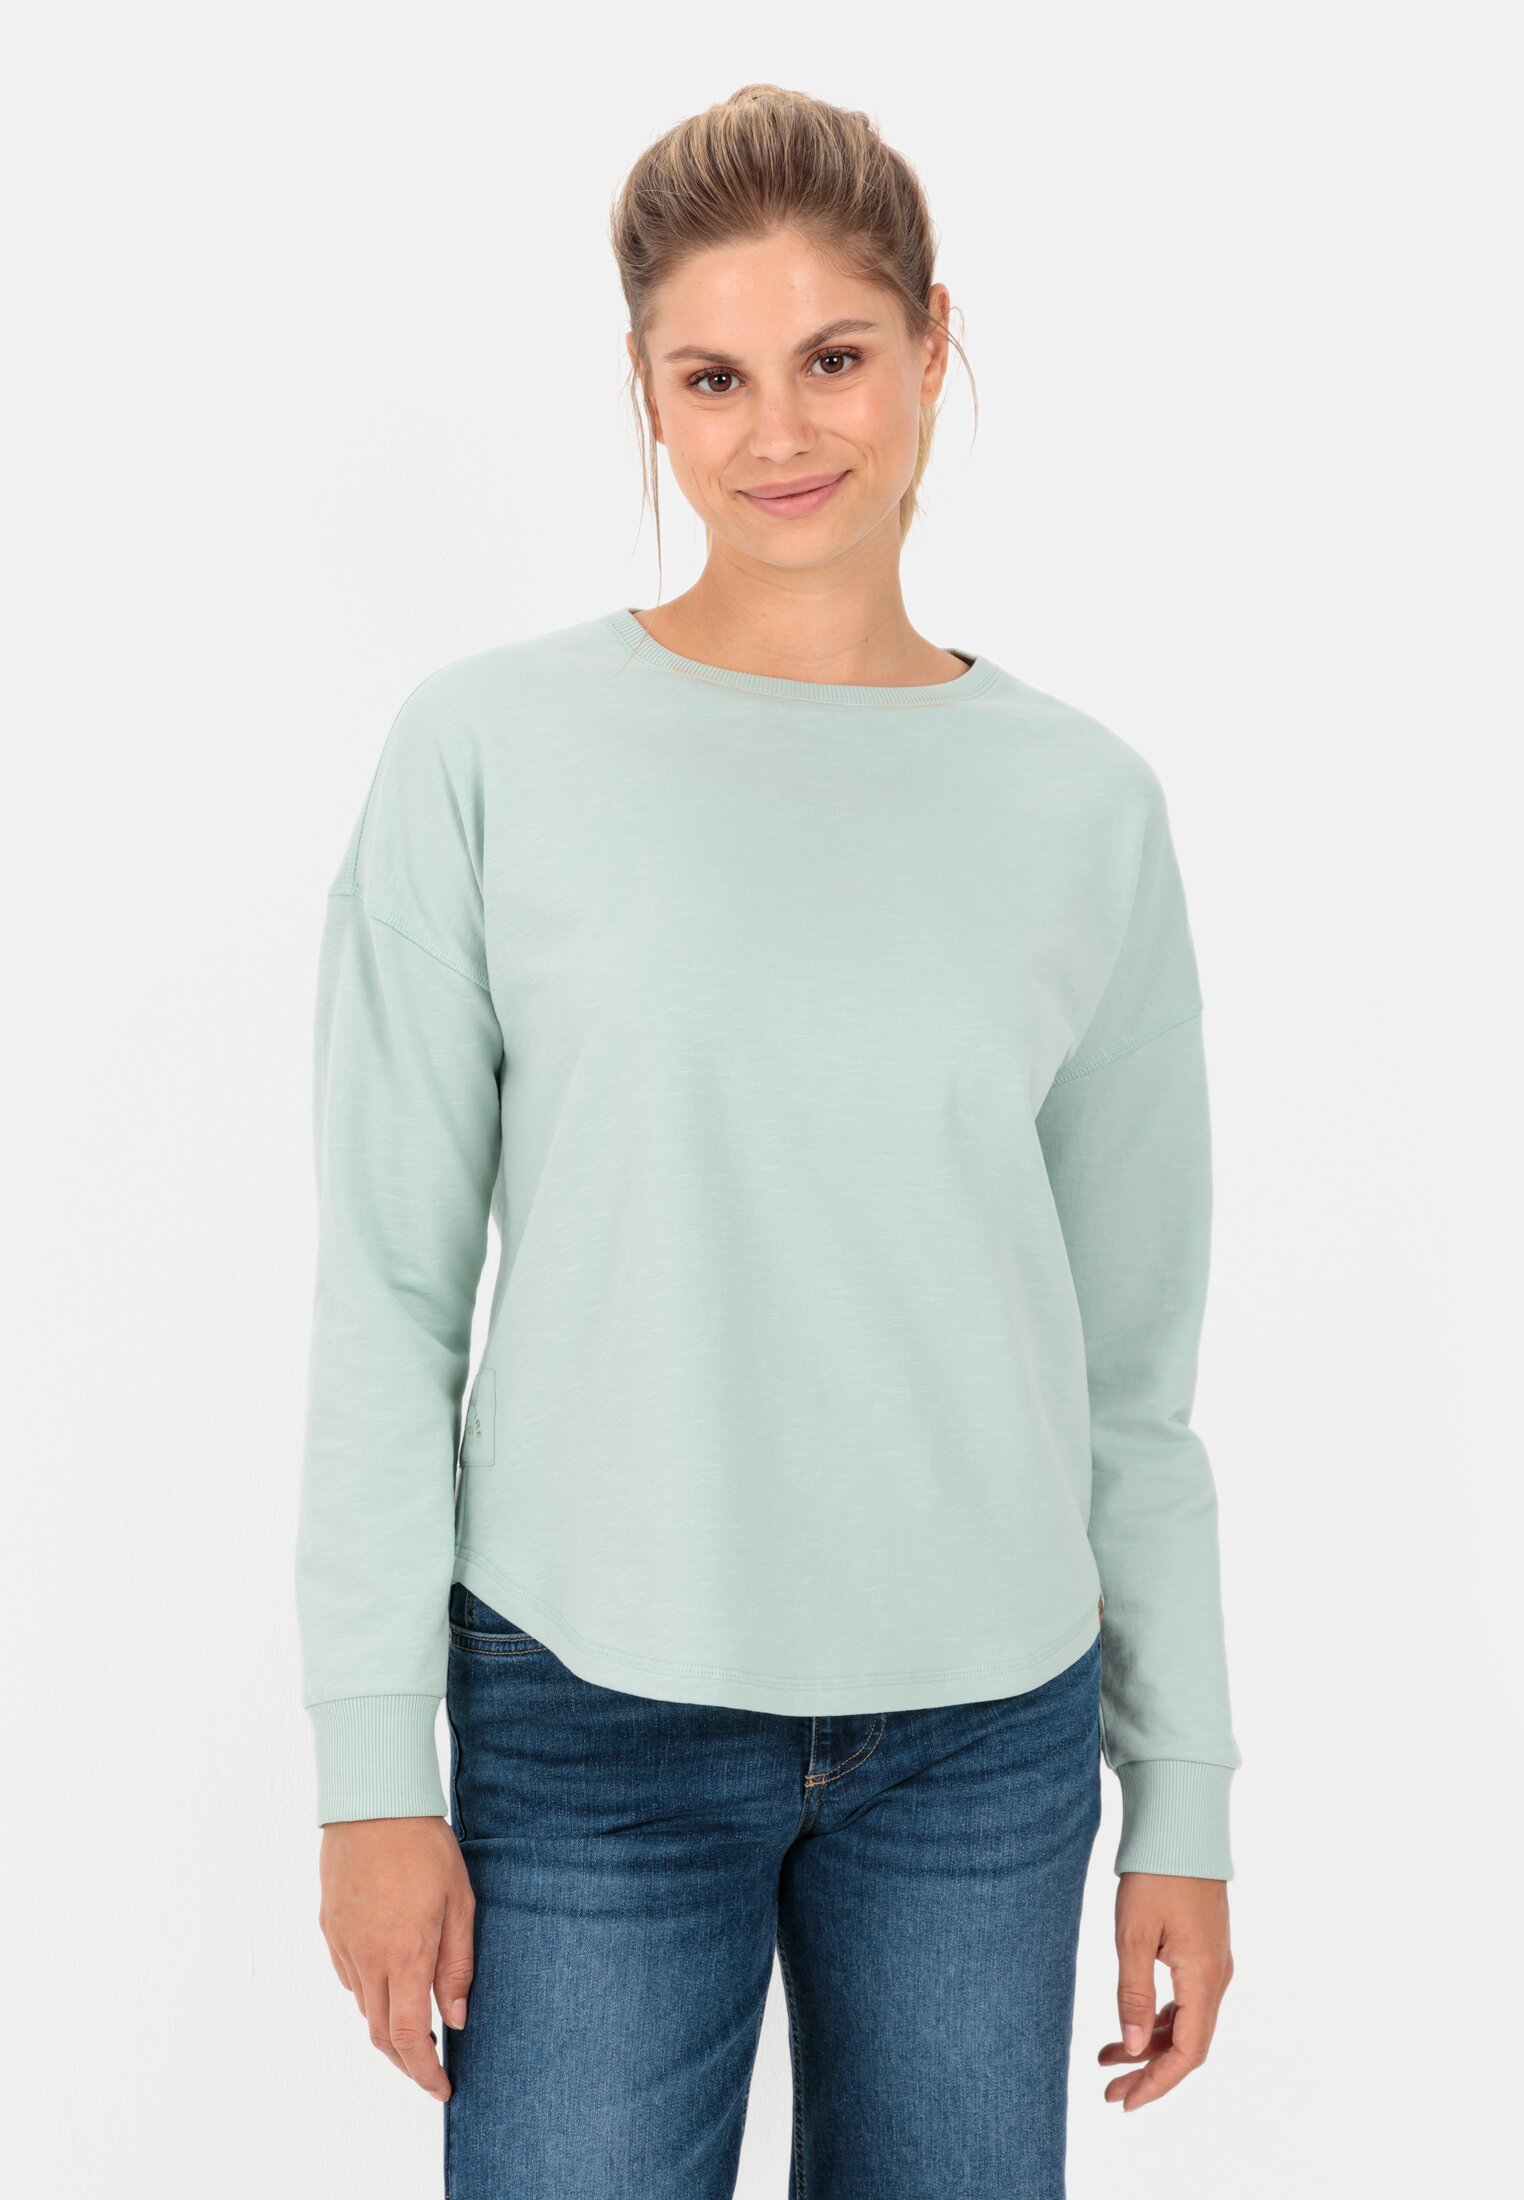 Camel Active Round neck sweatshirt made from pure cotton